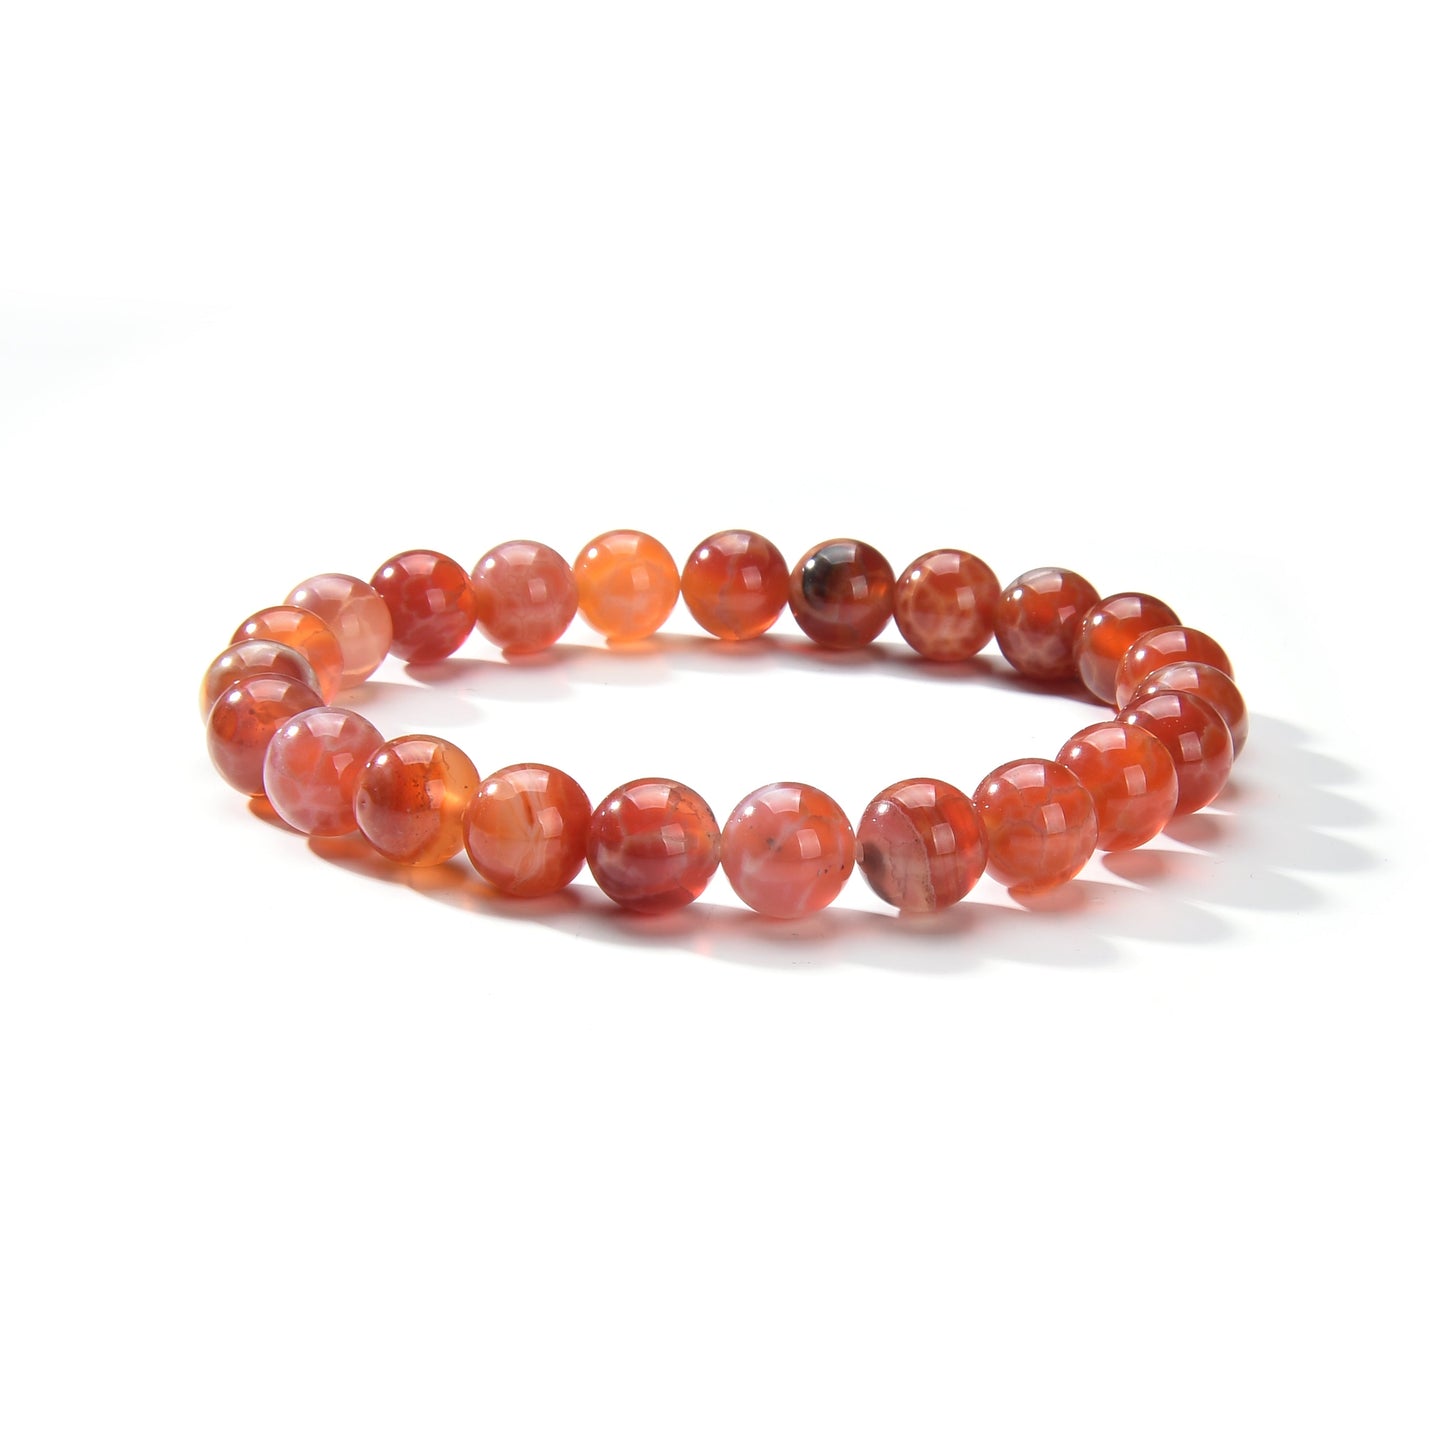 Fire Agate Round Beads Bracelet 8mm